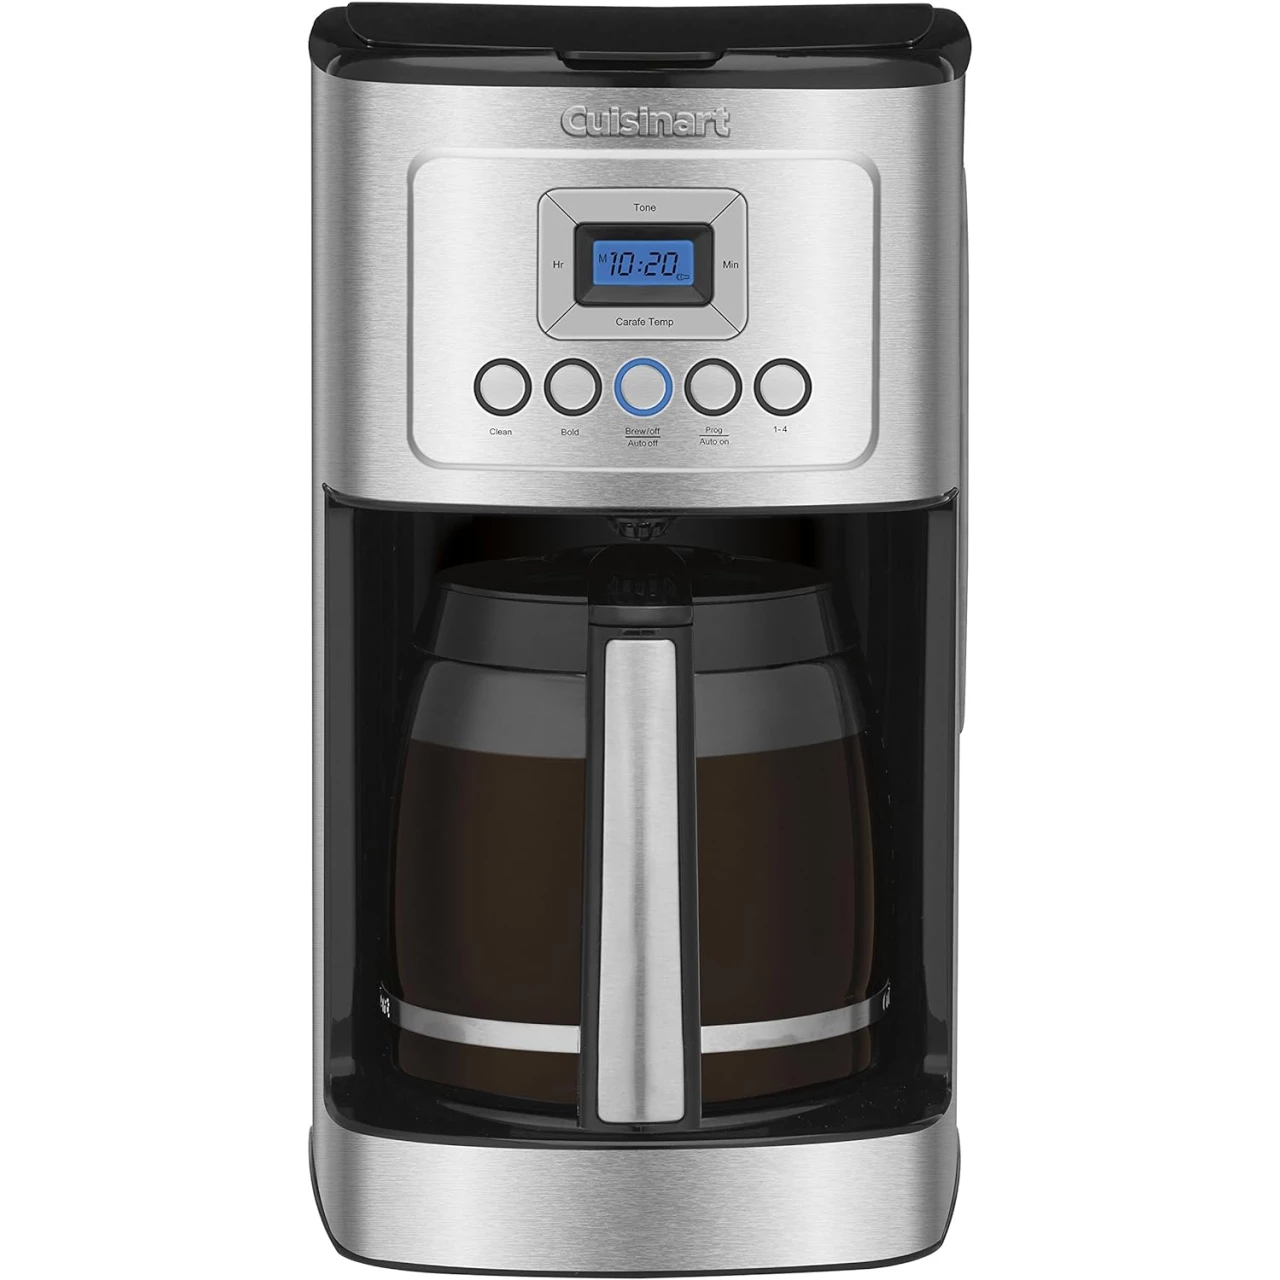 Cuisinart Coffee Maker, 14-Cup Glass Carafe, Fully Automatic for Brew Strength Control &amp; 1-4 Cup Setting, Stainless Steel, DCC-3200P1